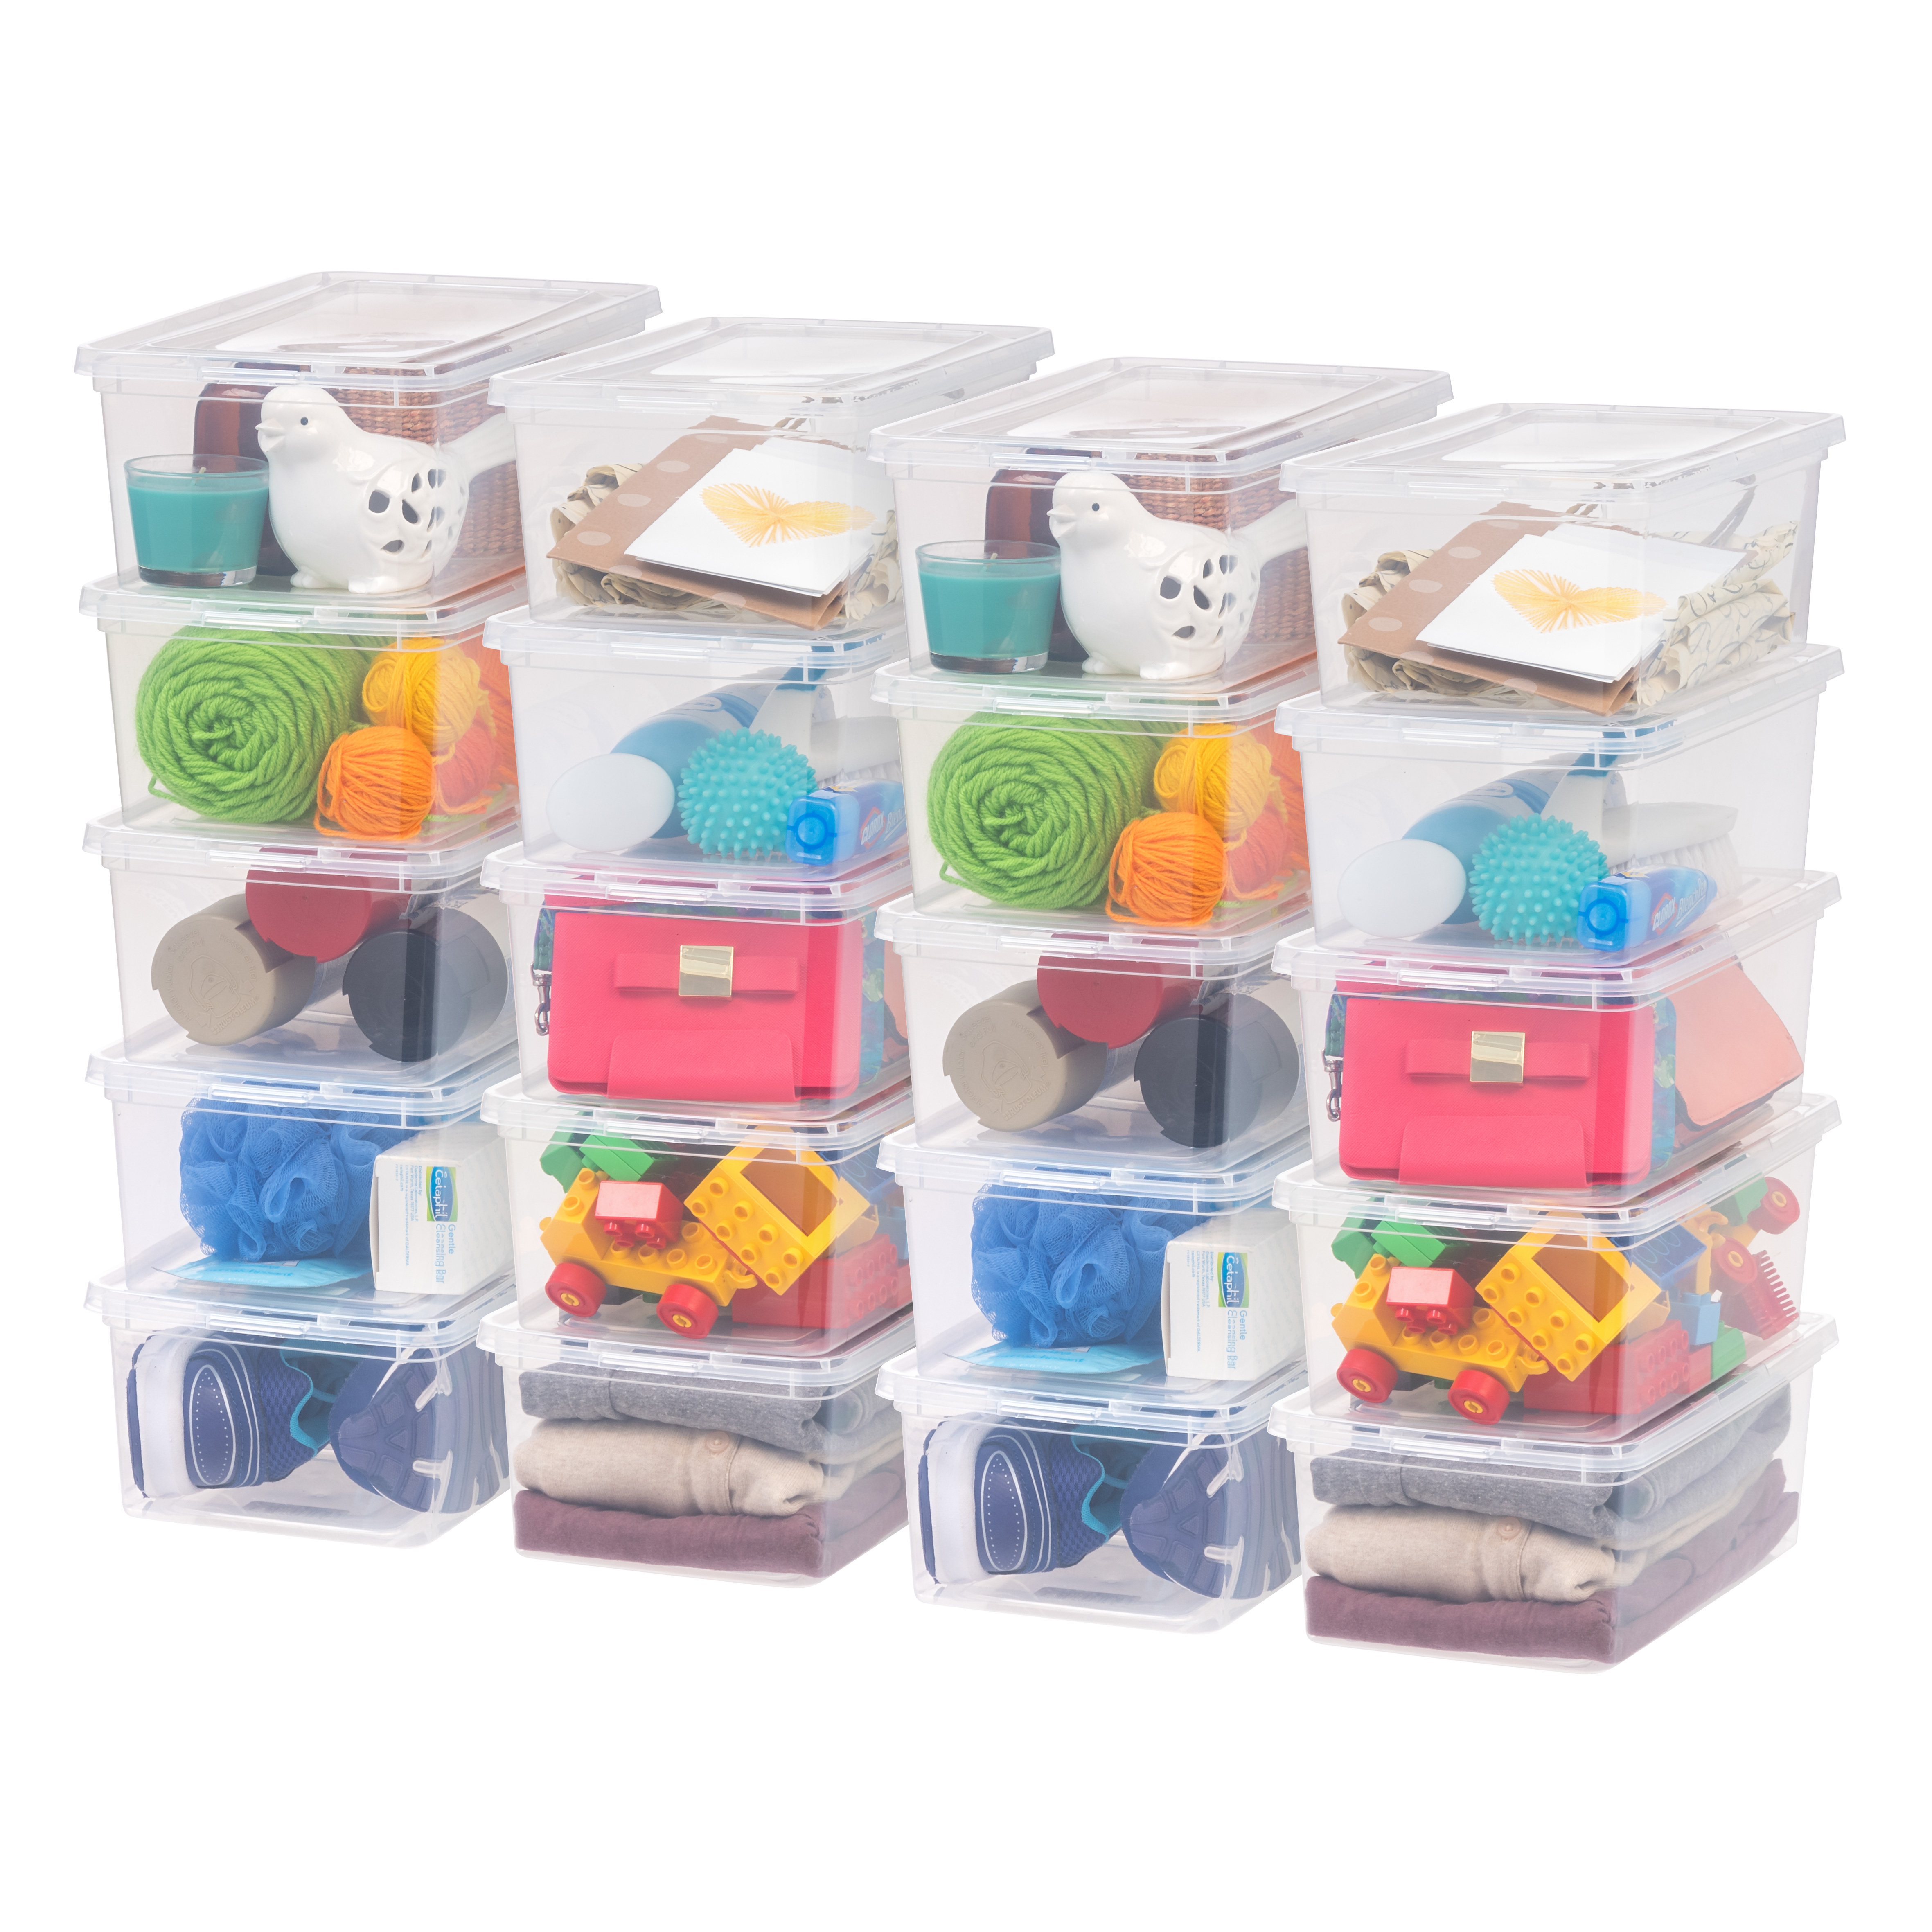 Mainstays 5 Qt. (1.25 gal.) Small Stackable Plastic Closet Storage Box, Clear, Set of 20 - image 1 of 9